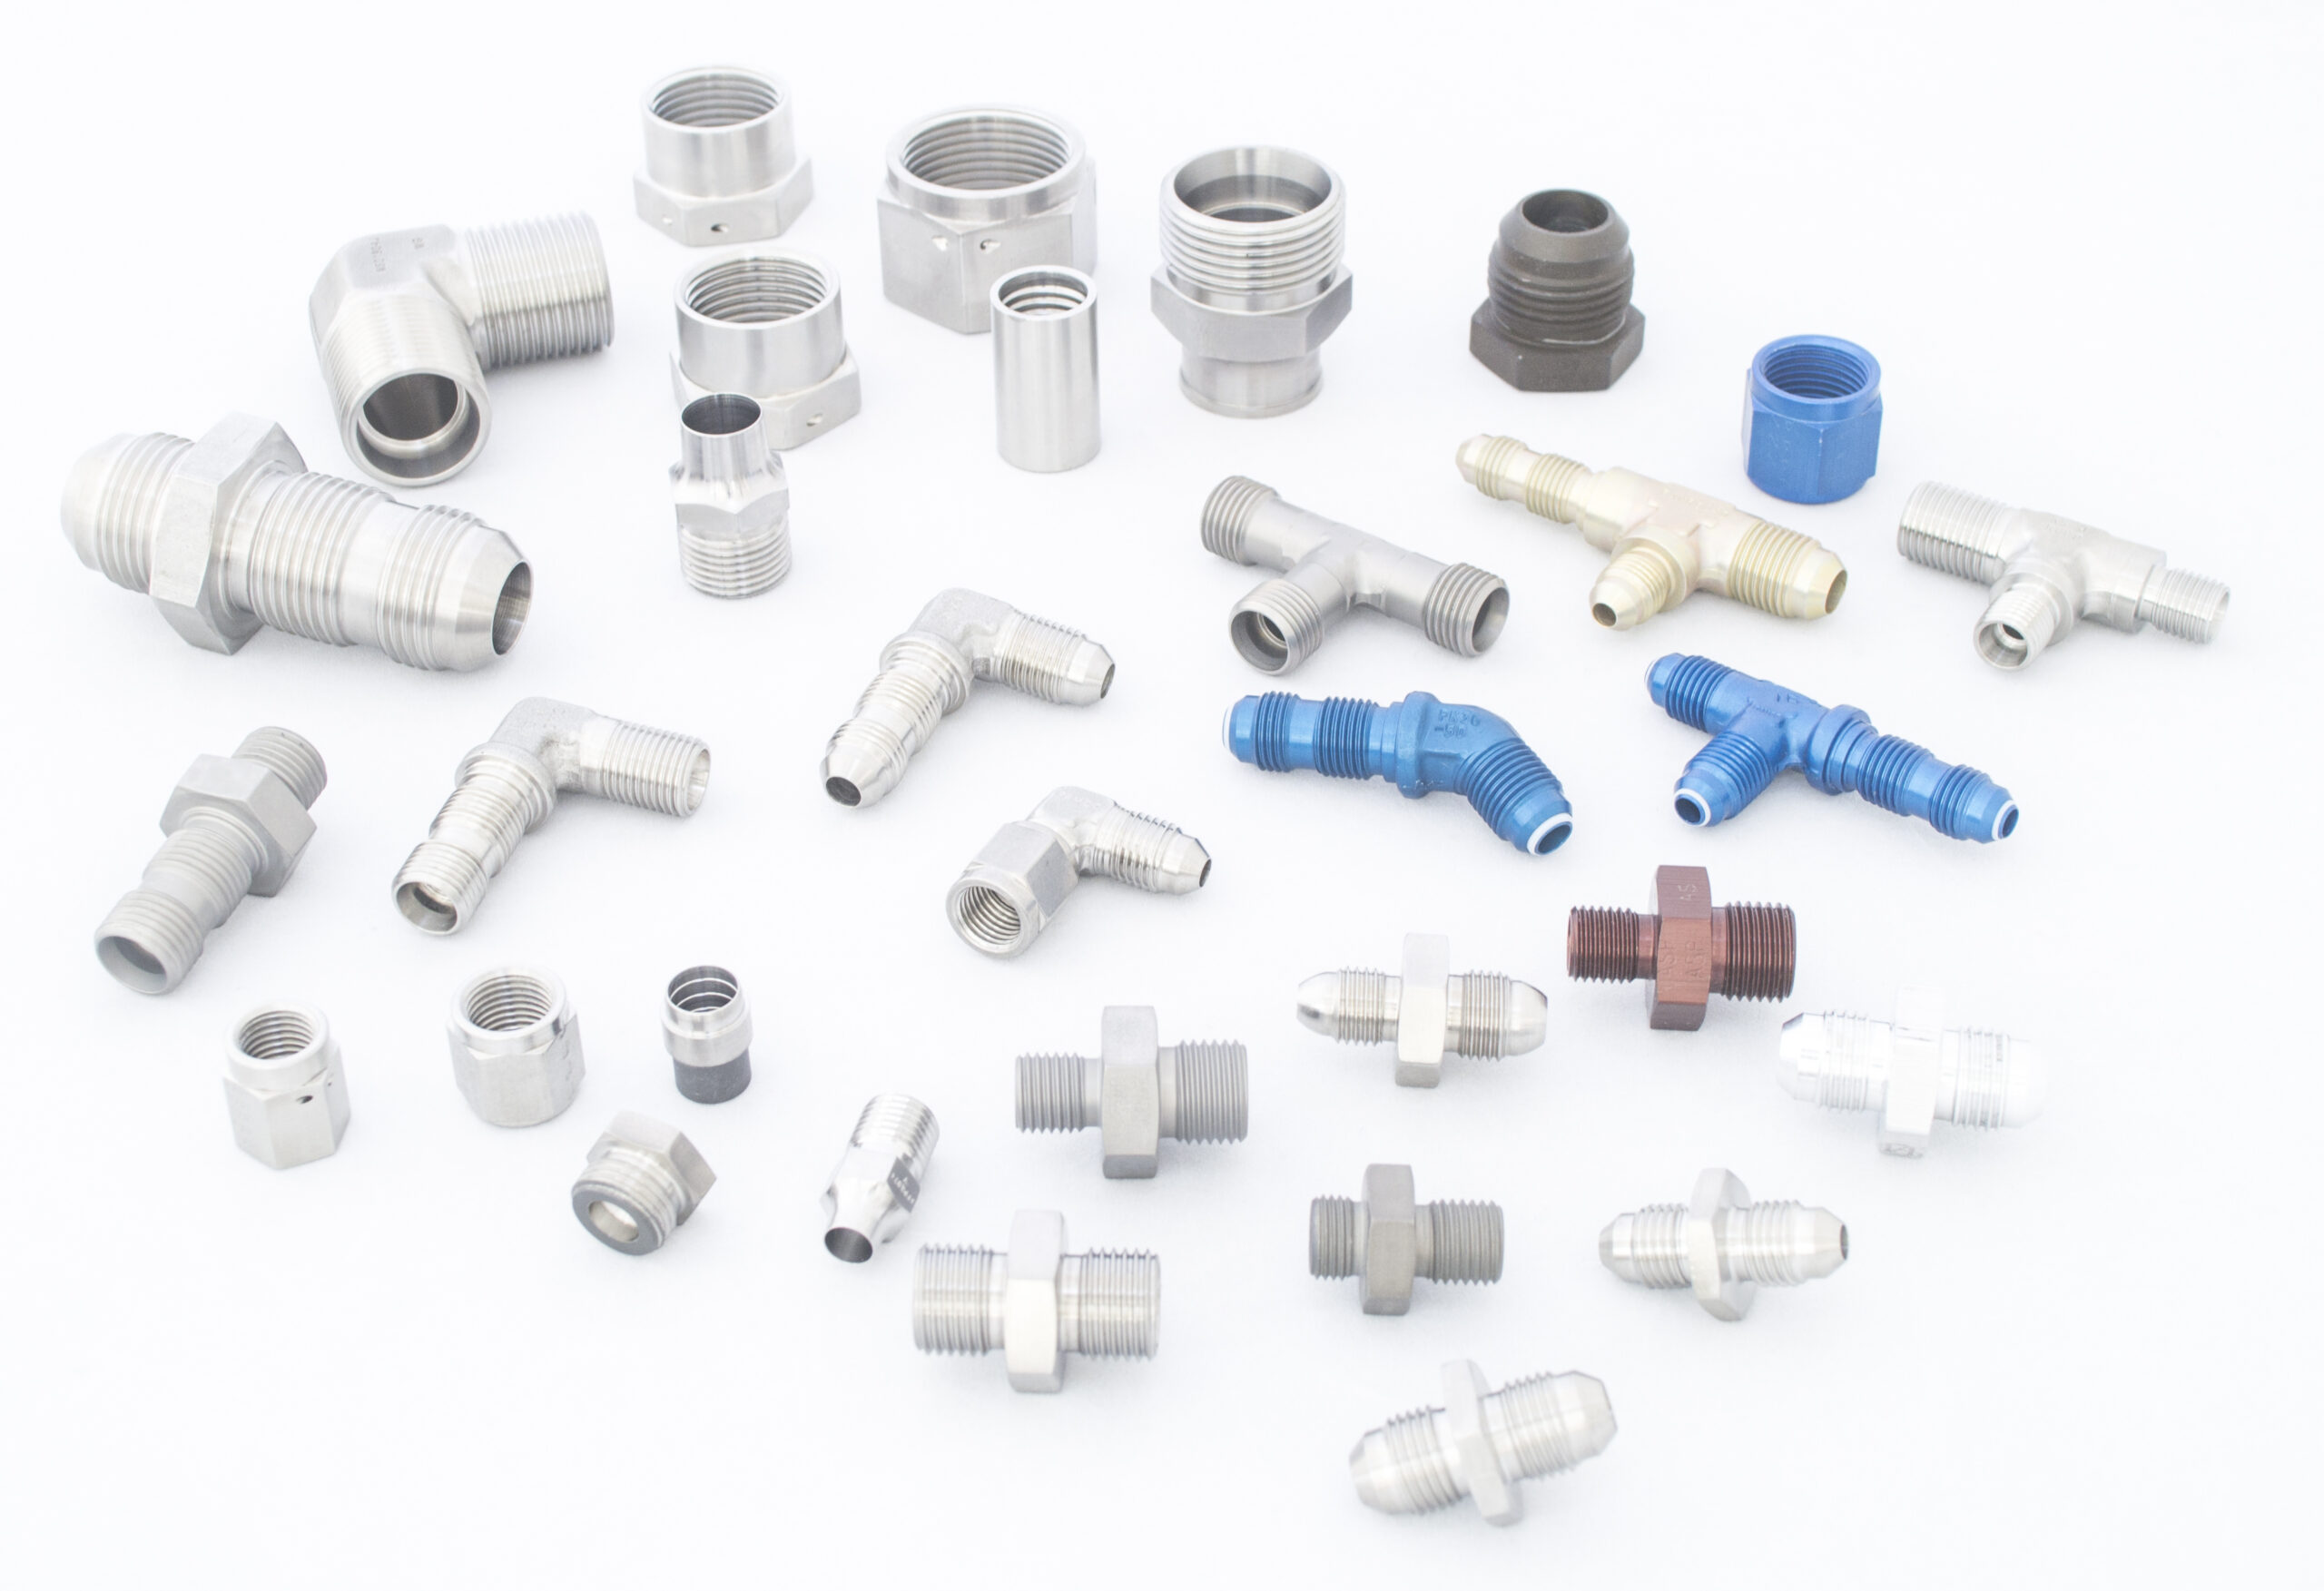 an assortment of metal fluid fittings and connectors in various sizes and shapes, displayed on a white background.